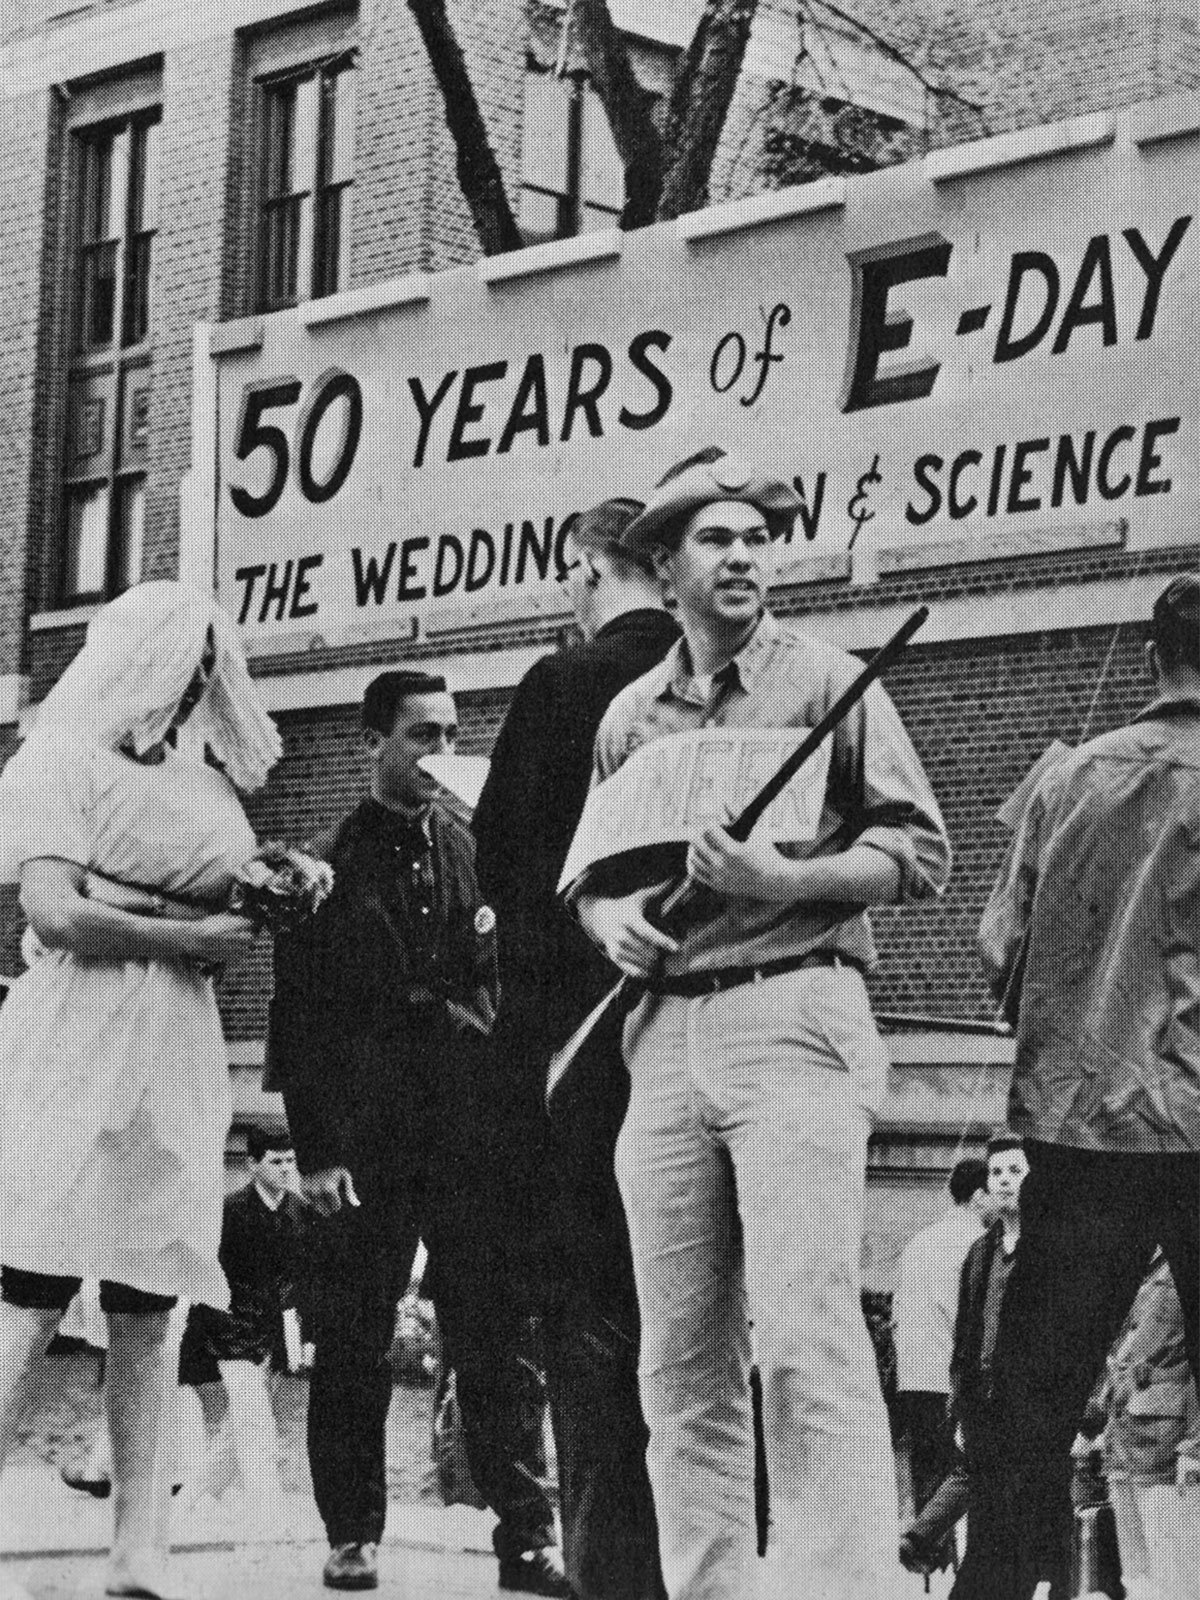 In 1960 E-day’s golden anniversary is represented by a wedding on a float in the parade